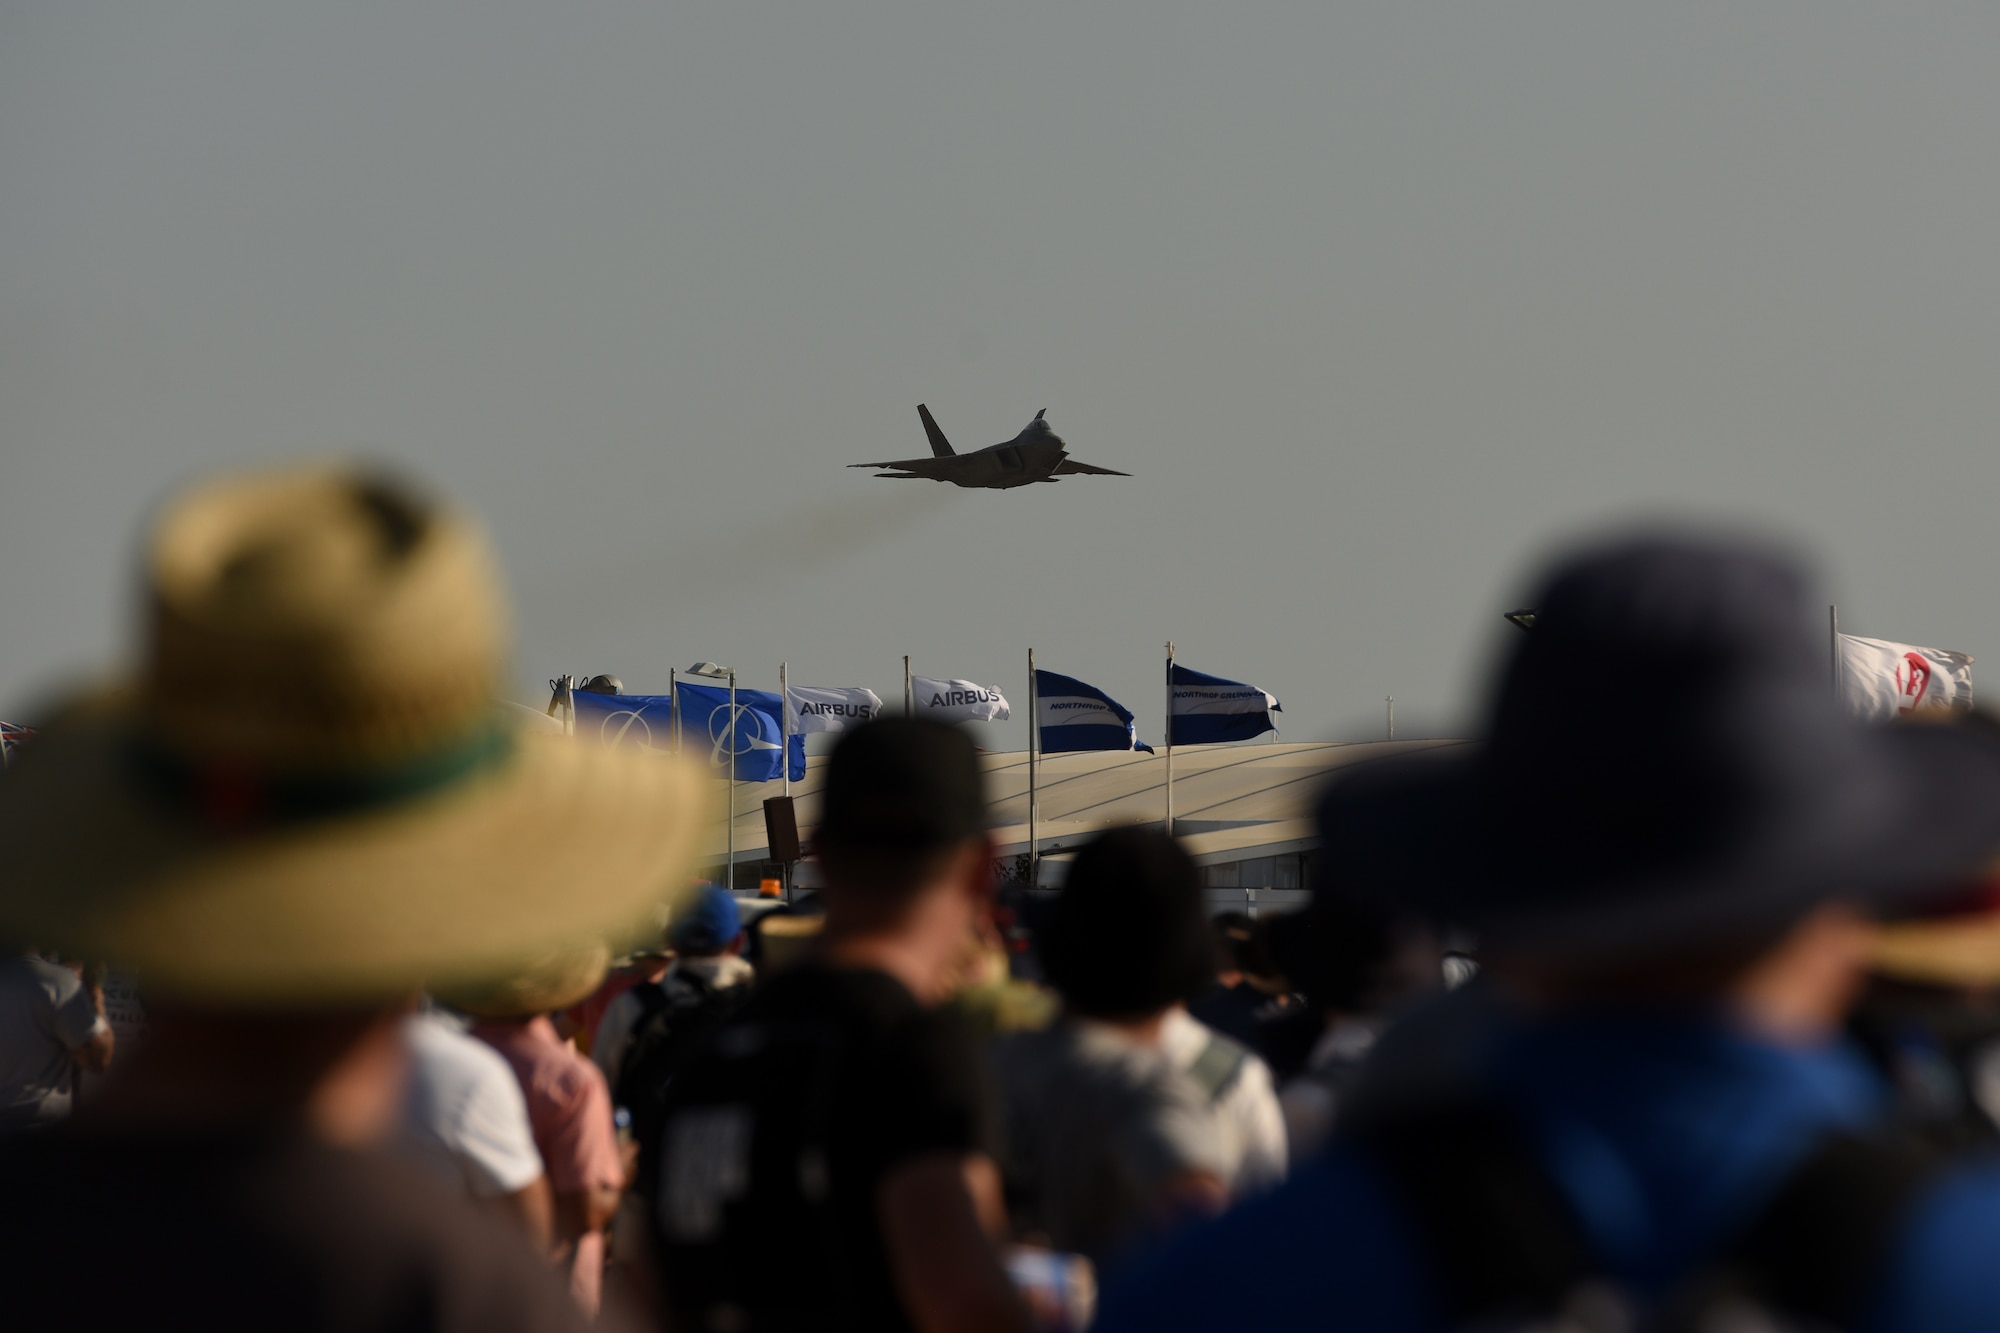 A U.S. Air Force F-22 Raptor assigned to Joint Base Elmendorf-Richardson, Alaska, flies over Avalon International Airport during the 2019 Australian International Airshow and Aerospace & Defence Exposition (AVALON 2019) at Geelong, Victoria, Australia, March 1, 2019.